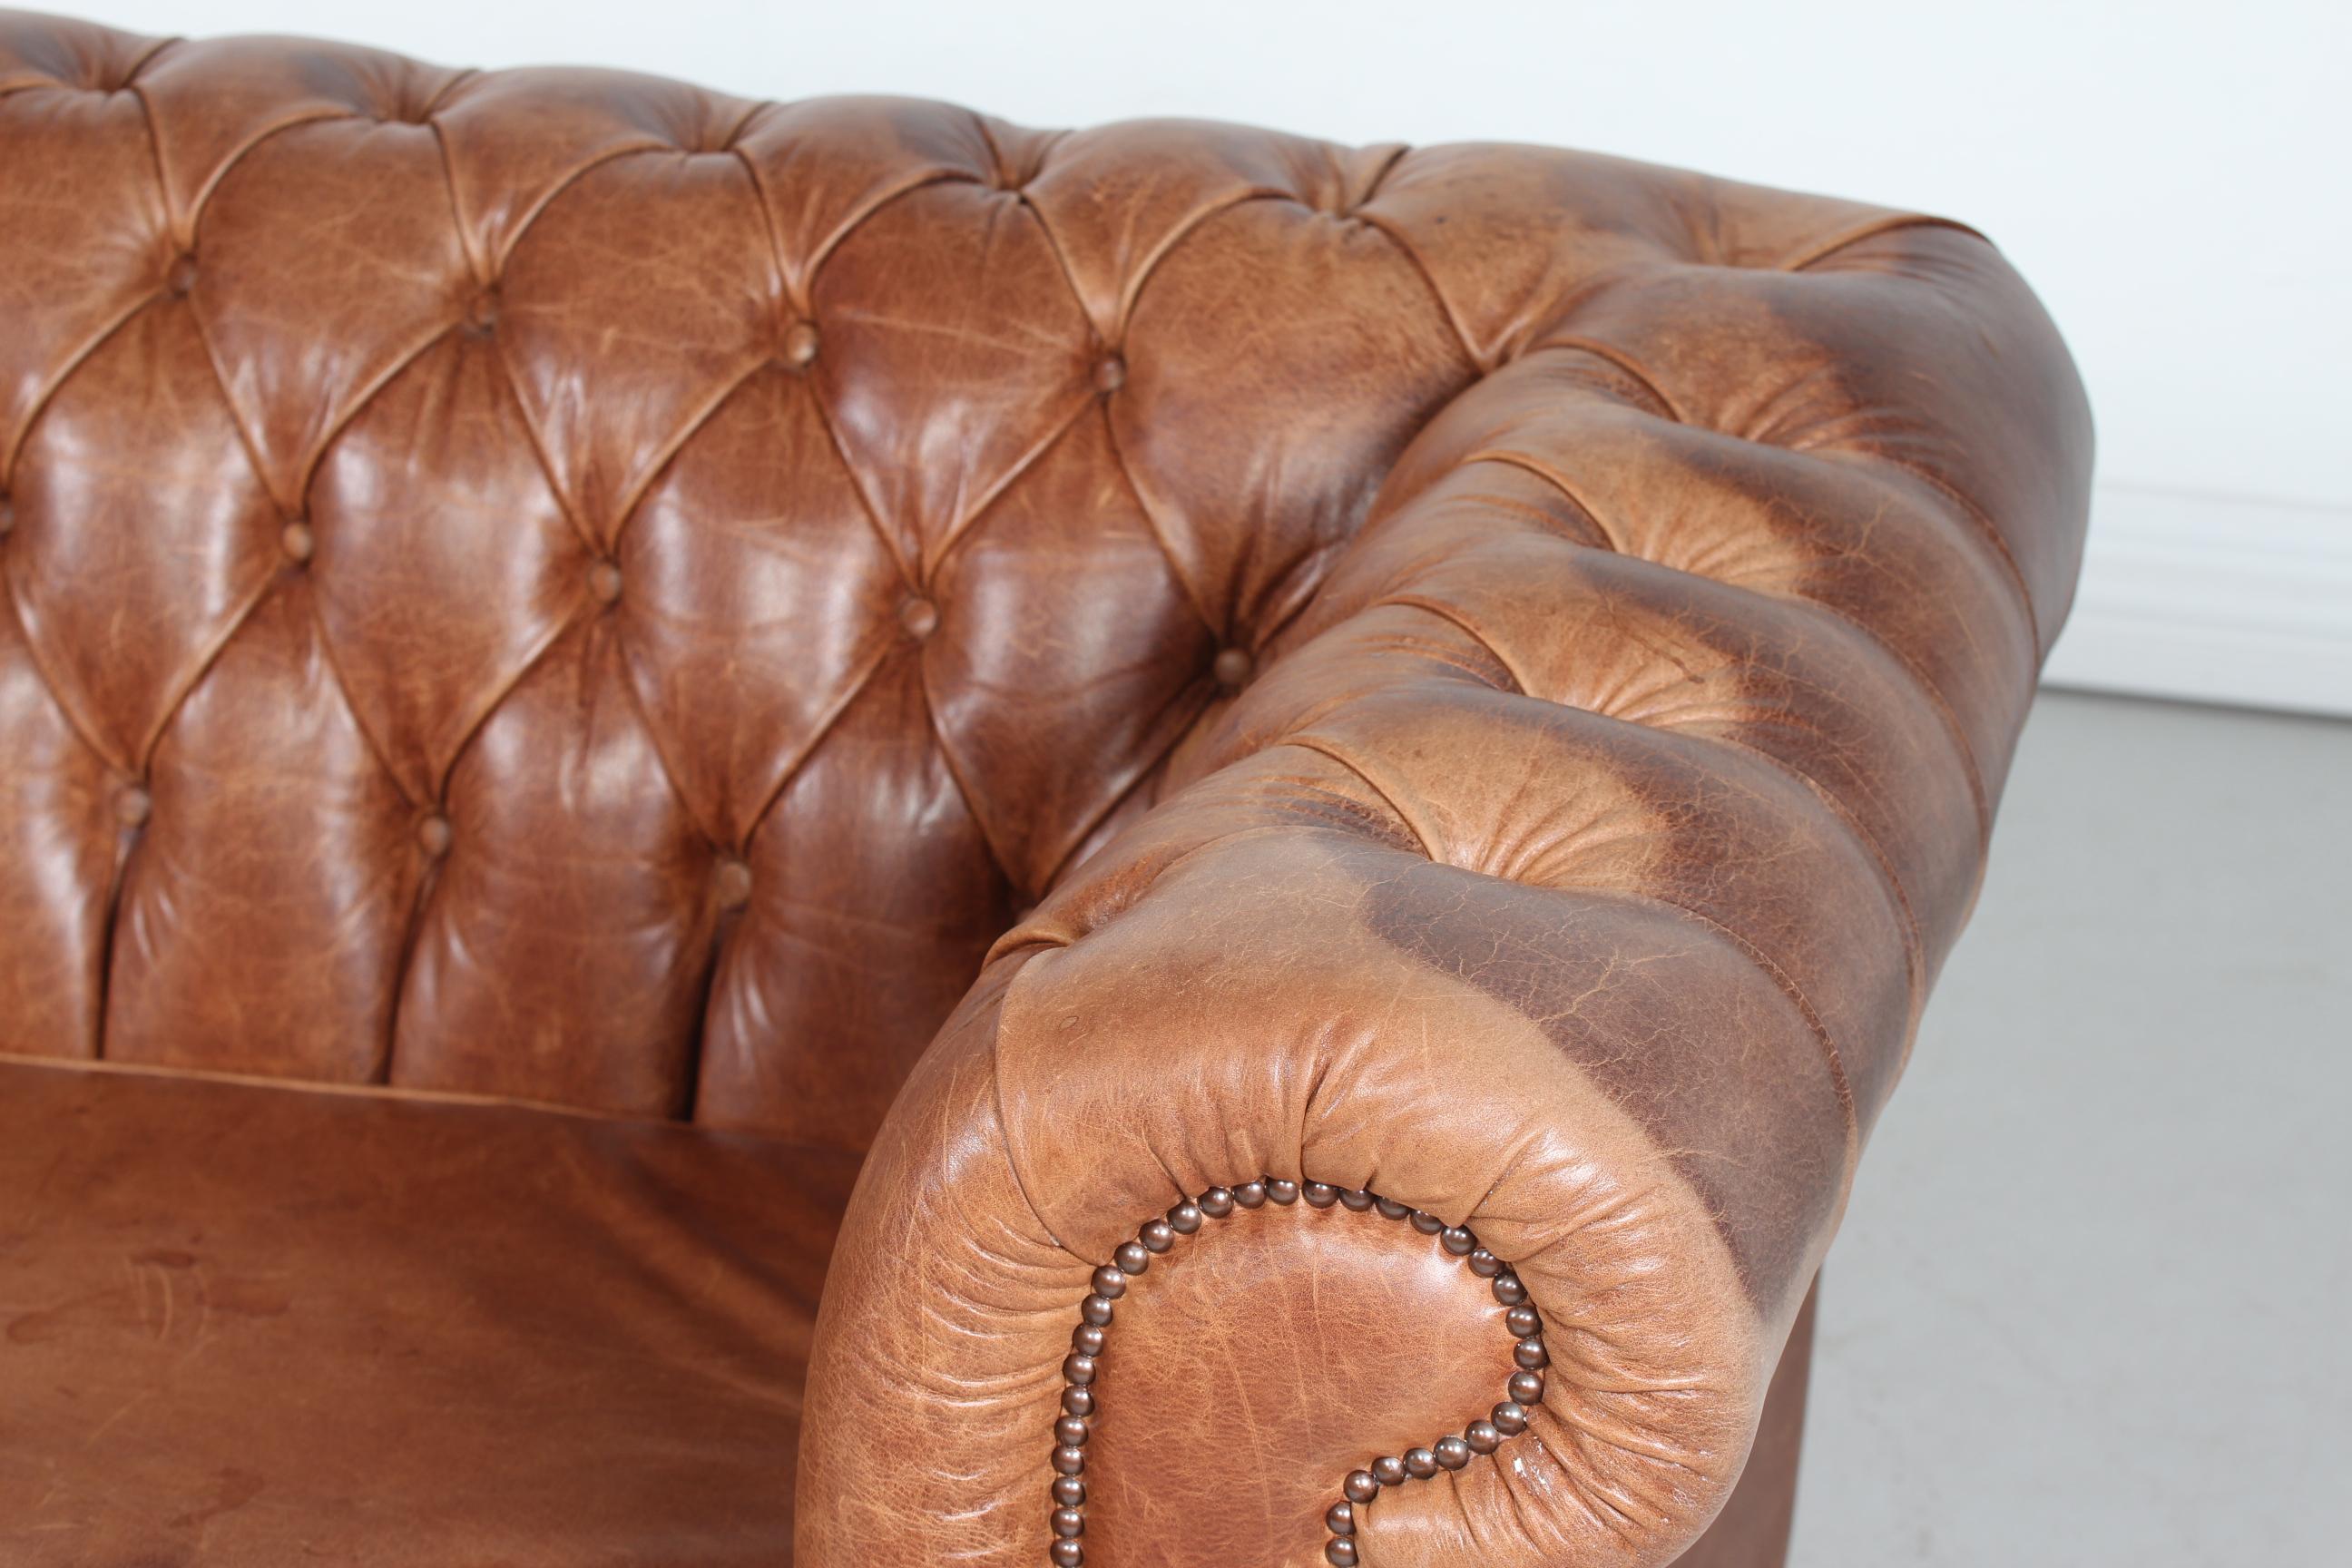 Vintage 3-seat Chesterfield sofa made in the 1970s.
It's upholstered with delicate and good quality cognac colored leather with numerous buttons. 

Measures: Length 188 cm
Height 72 cm
Seat height 43 cm
Depth 90 cm

The sofa is in good